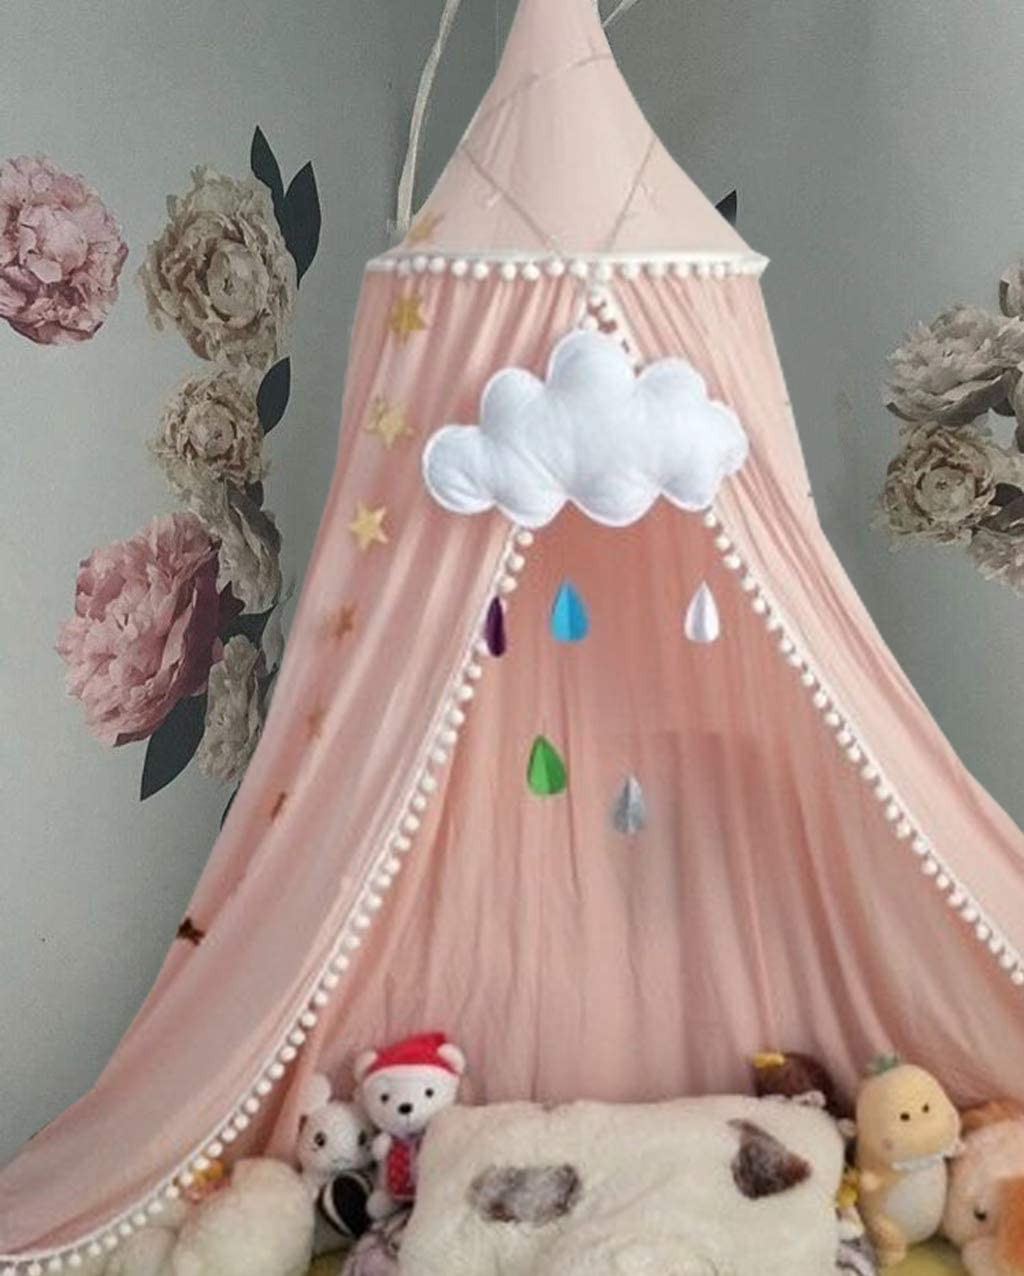 Bed Canopy for Girls Bed with Pom Pom, Cotton Dome Mosquito Net for Baby, Kids Indoor Outdoor Play